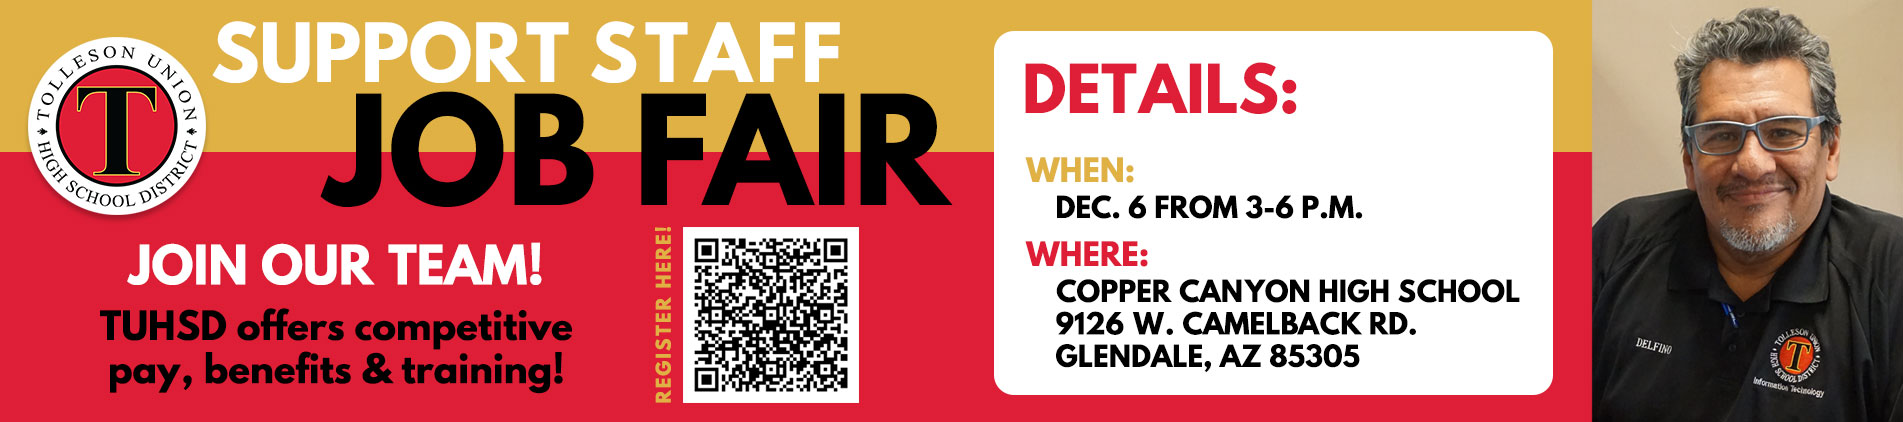 Support Staff Job Fair. Join our team! TUHSD offers competitive pay, benefits and training! December 6 from 3 to 6 pm at Copper Canyon High School. Click to register.